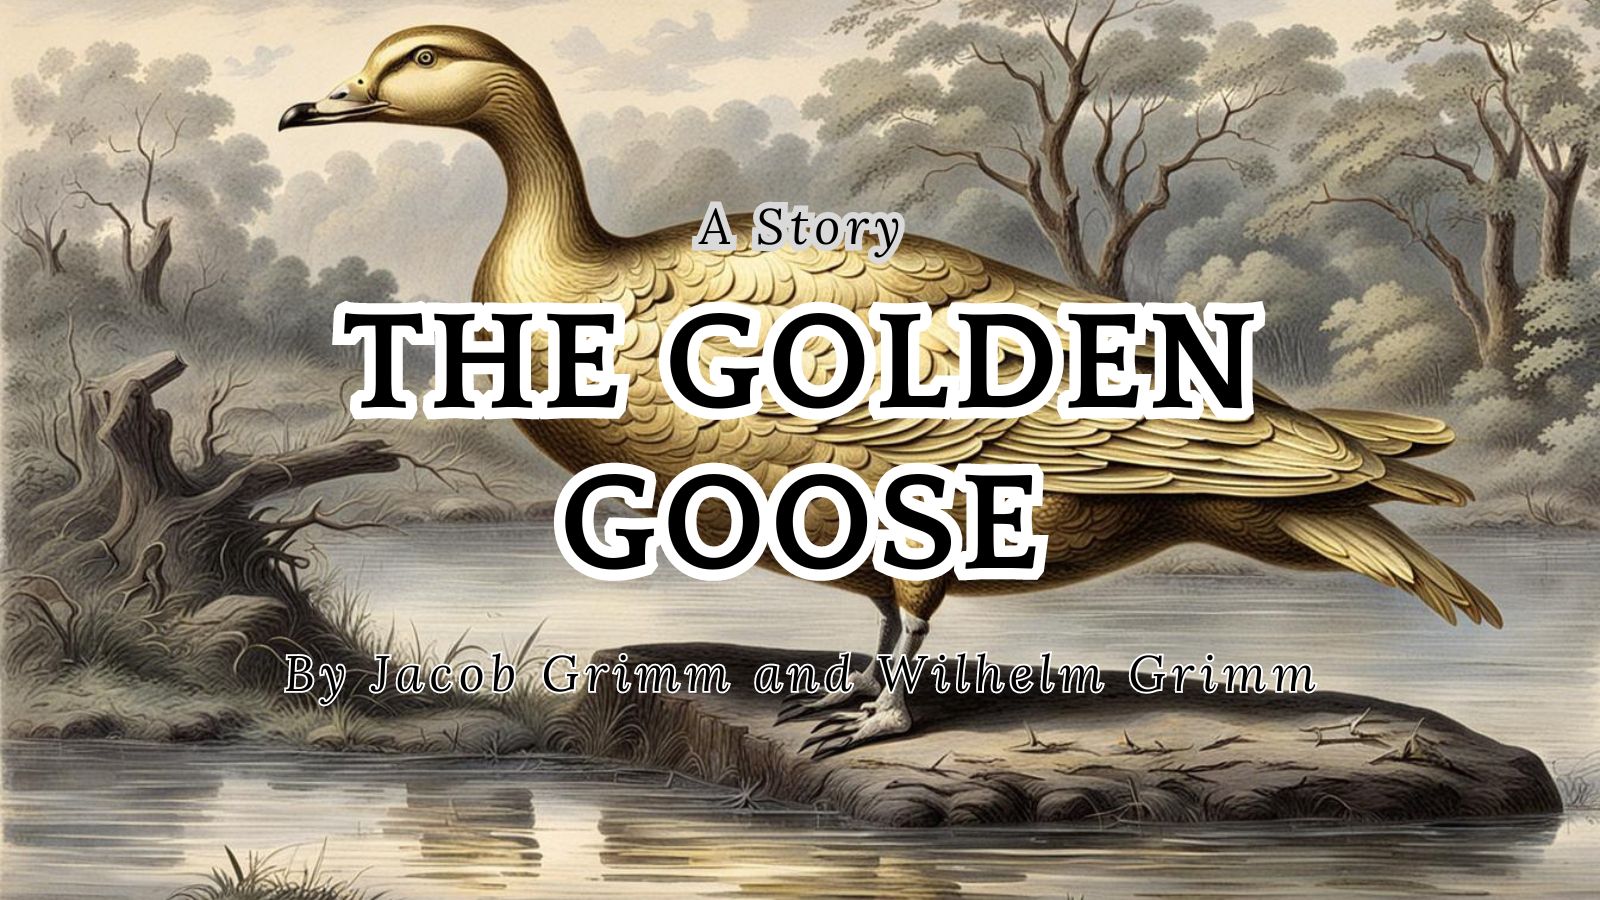 THE GOLDEN GOOSE By Jacob Grimm and Wilhelm Grimm